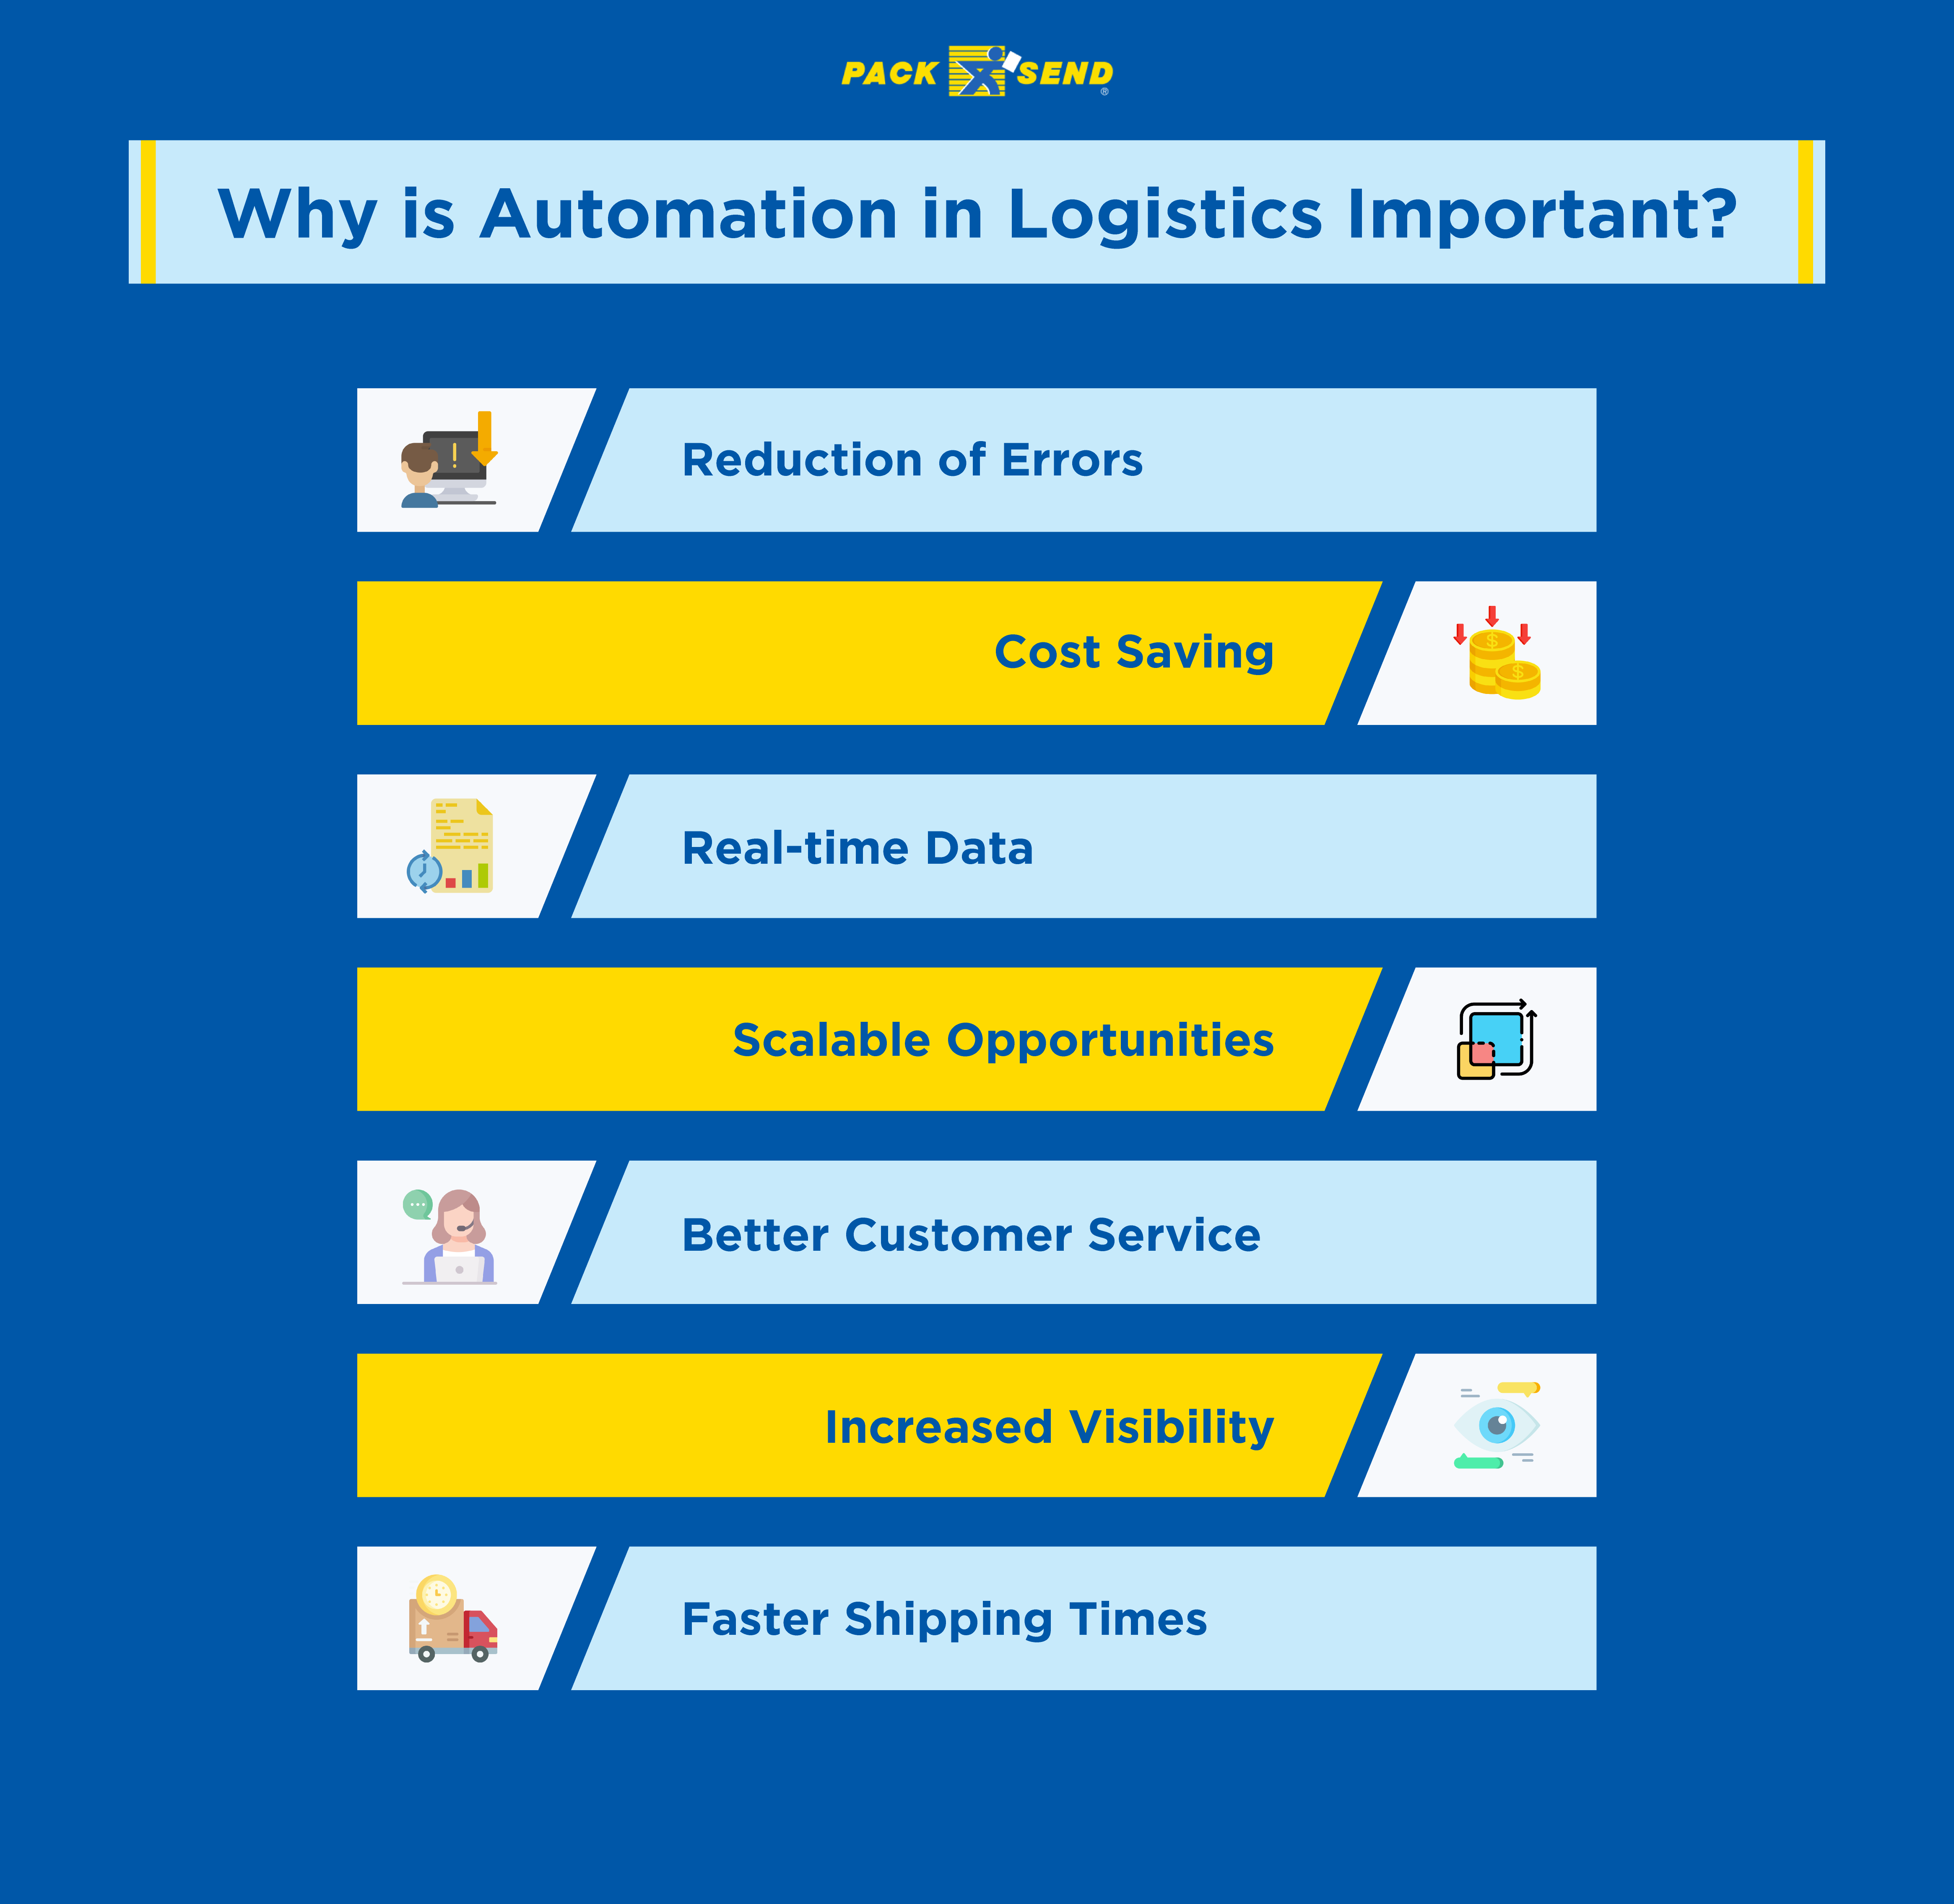 Why is automation in logistics important